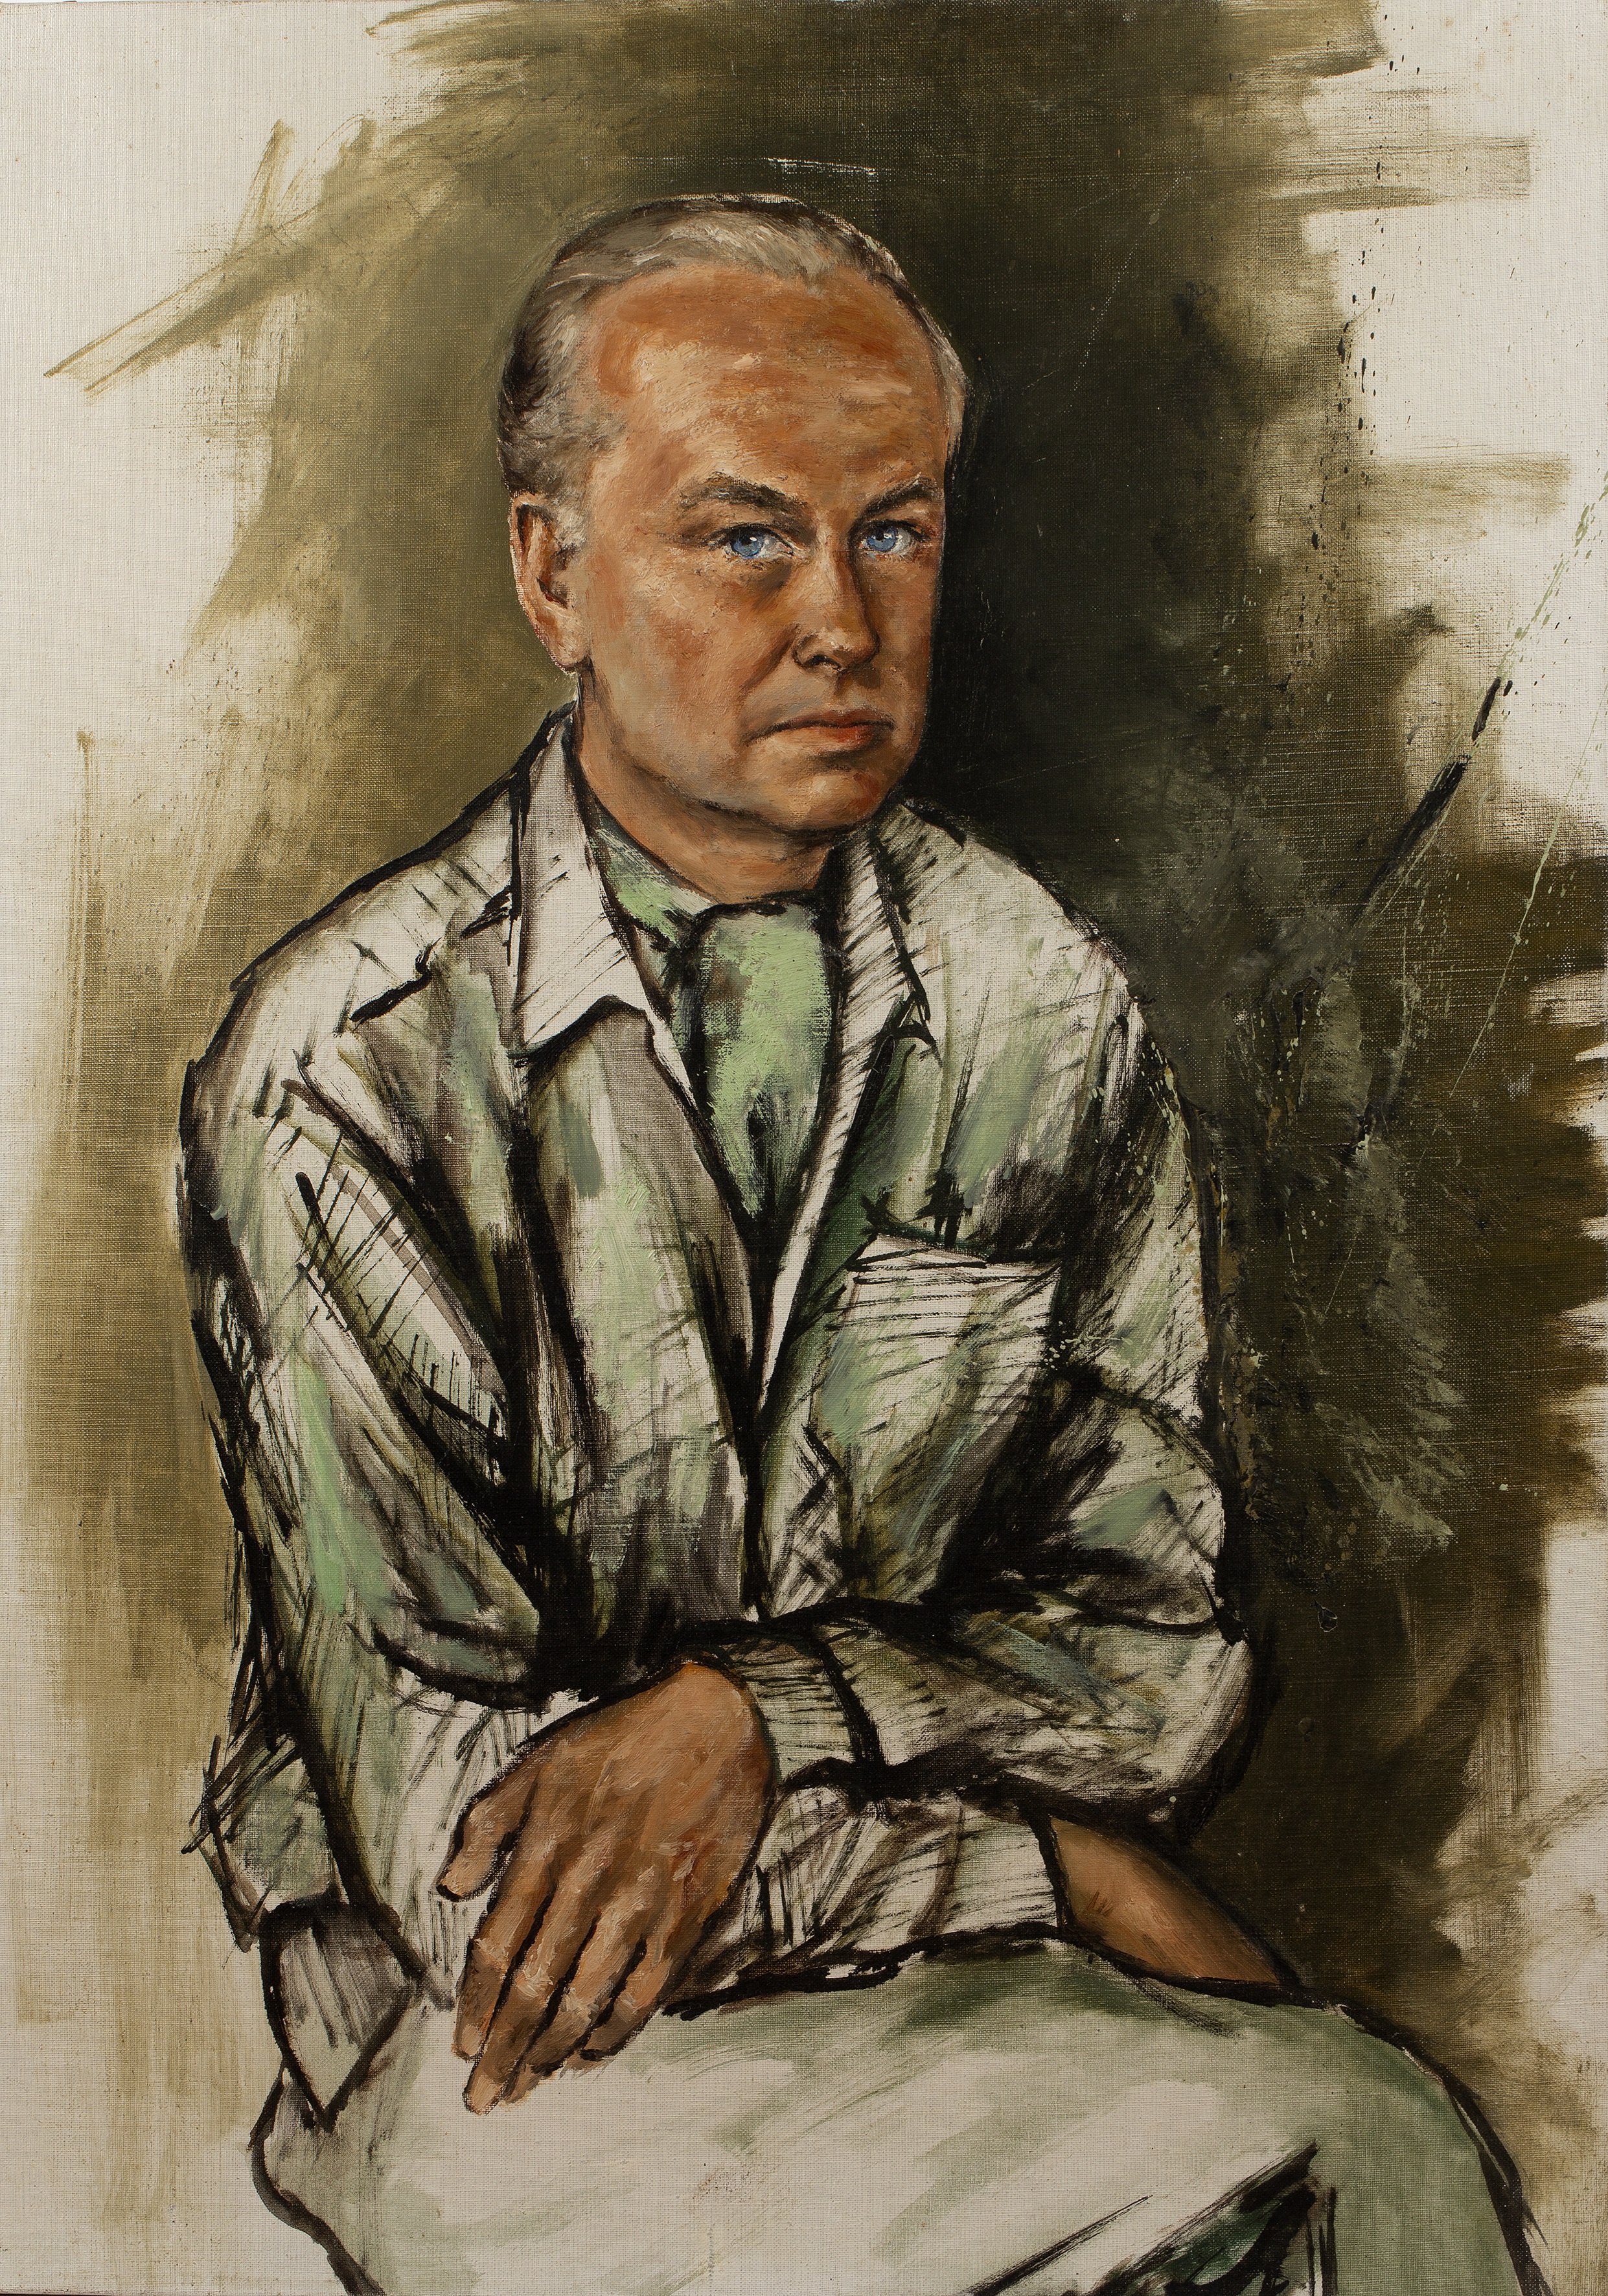 Rene Cazassus (Contemporary) 'Portrait of a seated man', oil on canvas, unsigned, unframed, 87cm x